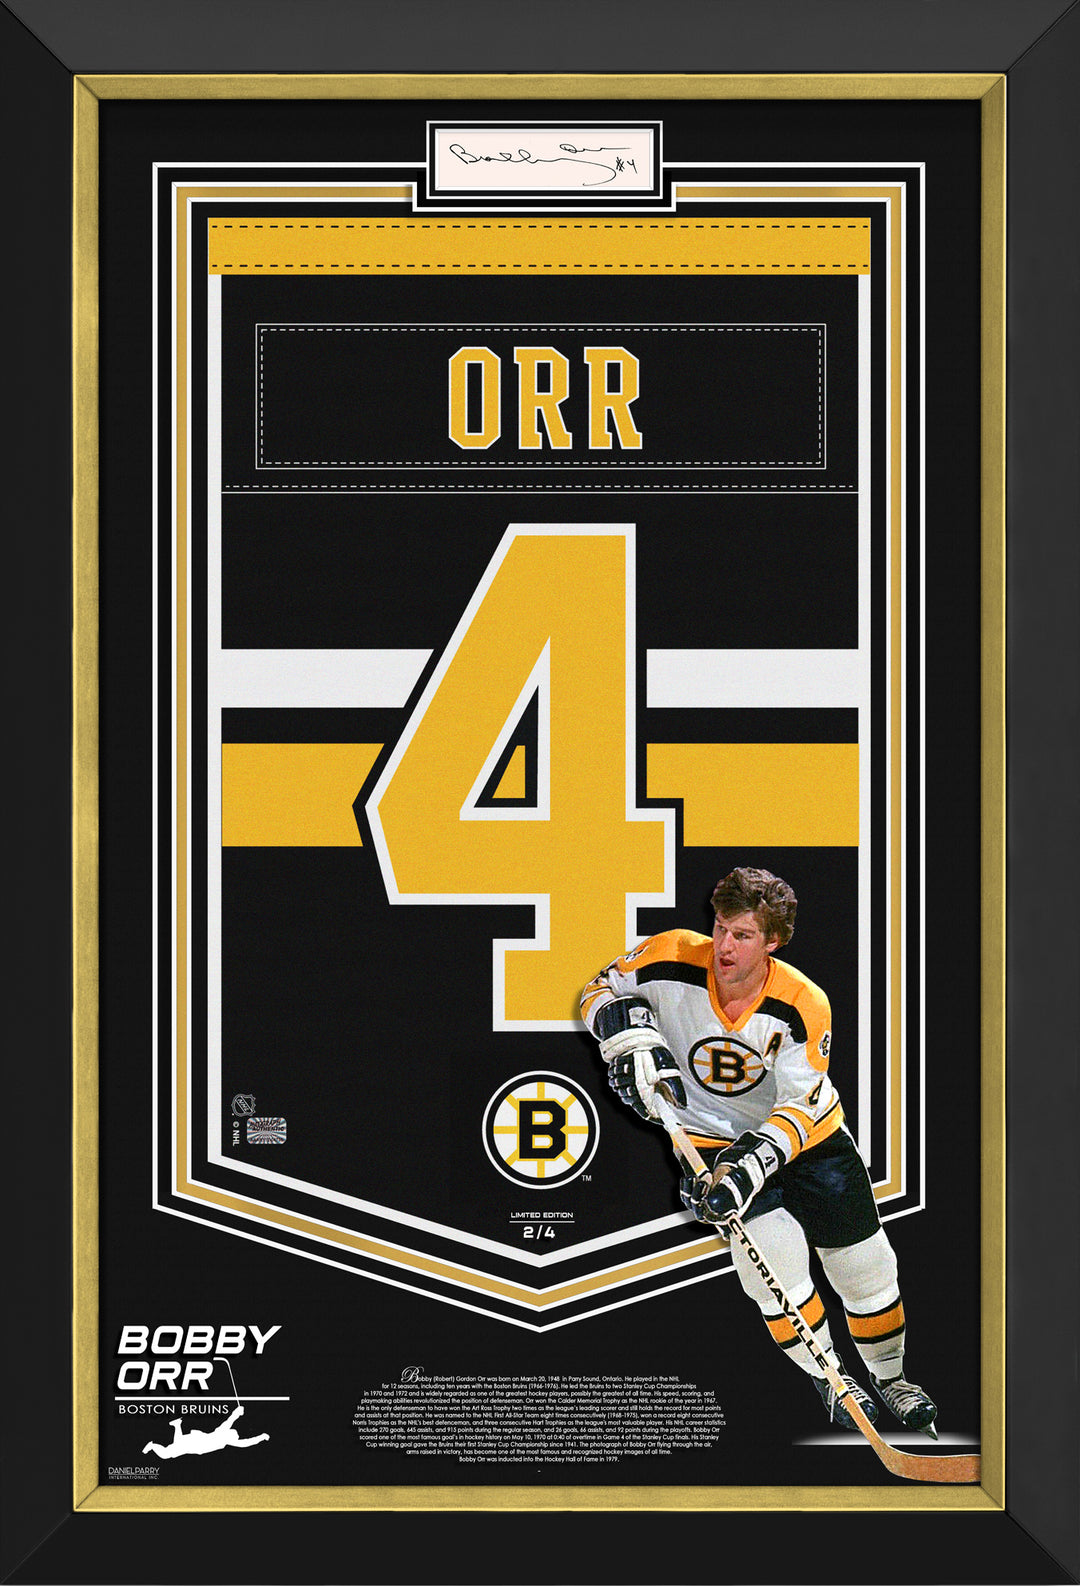 Bobby Orr Framed Arena Banner Limited Edition #2 Of 4 Boston Bruins, Boston Bruins, NHL, Hockey, Autographed, Signed, AAABH33017